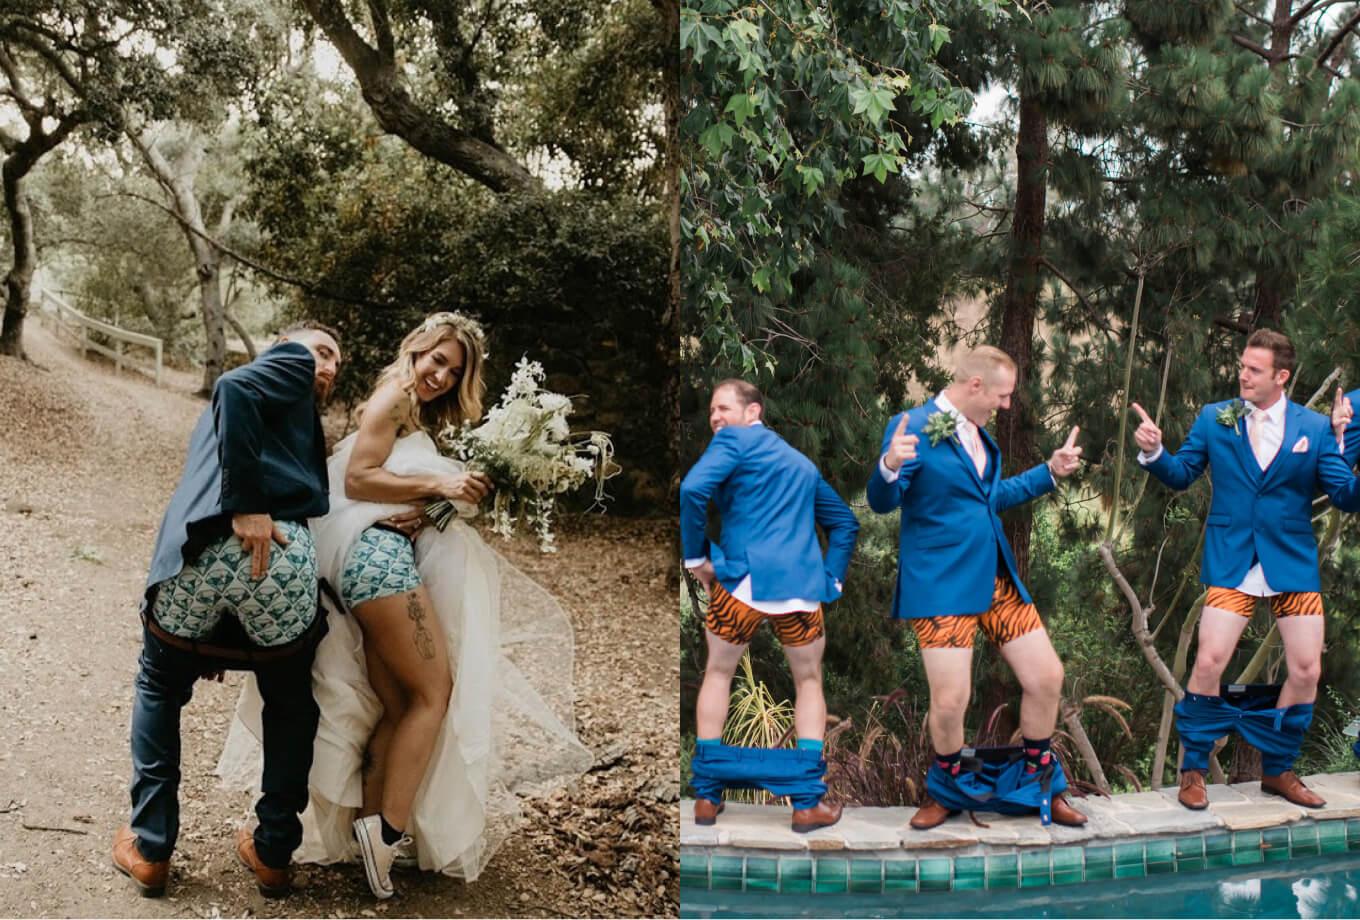 Two pictures of a bridal party wearing matching MeUndies underwear